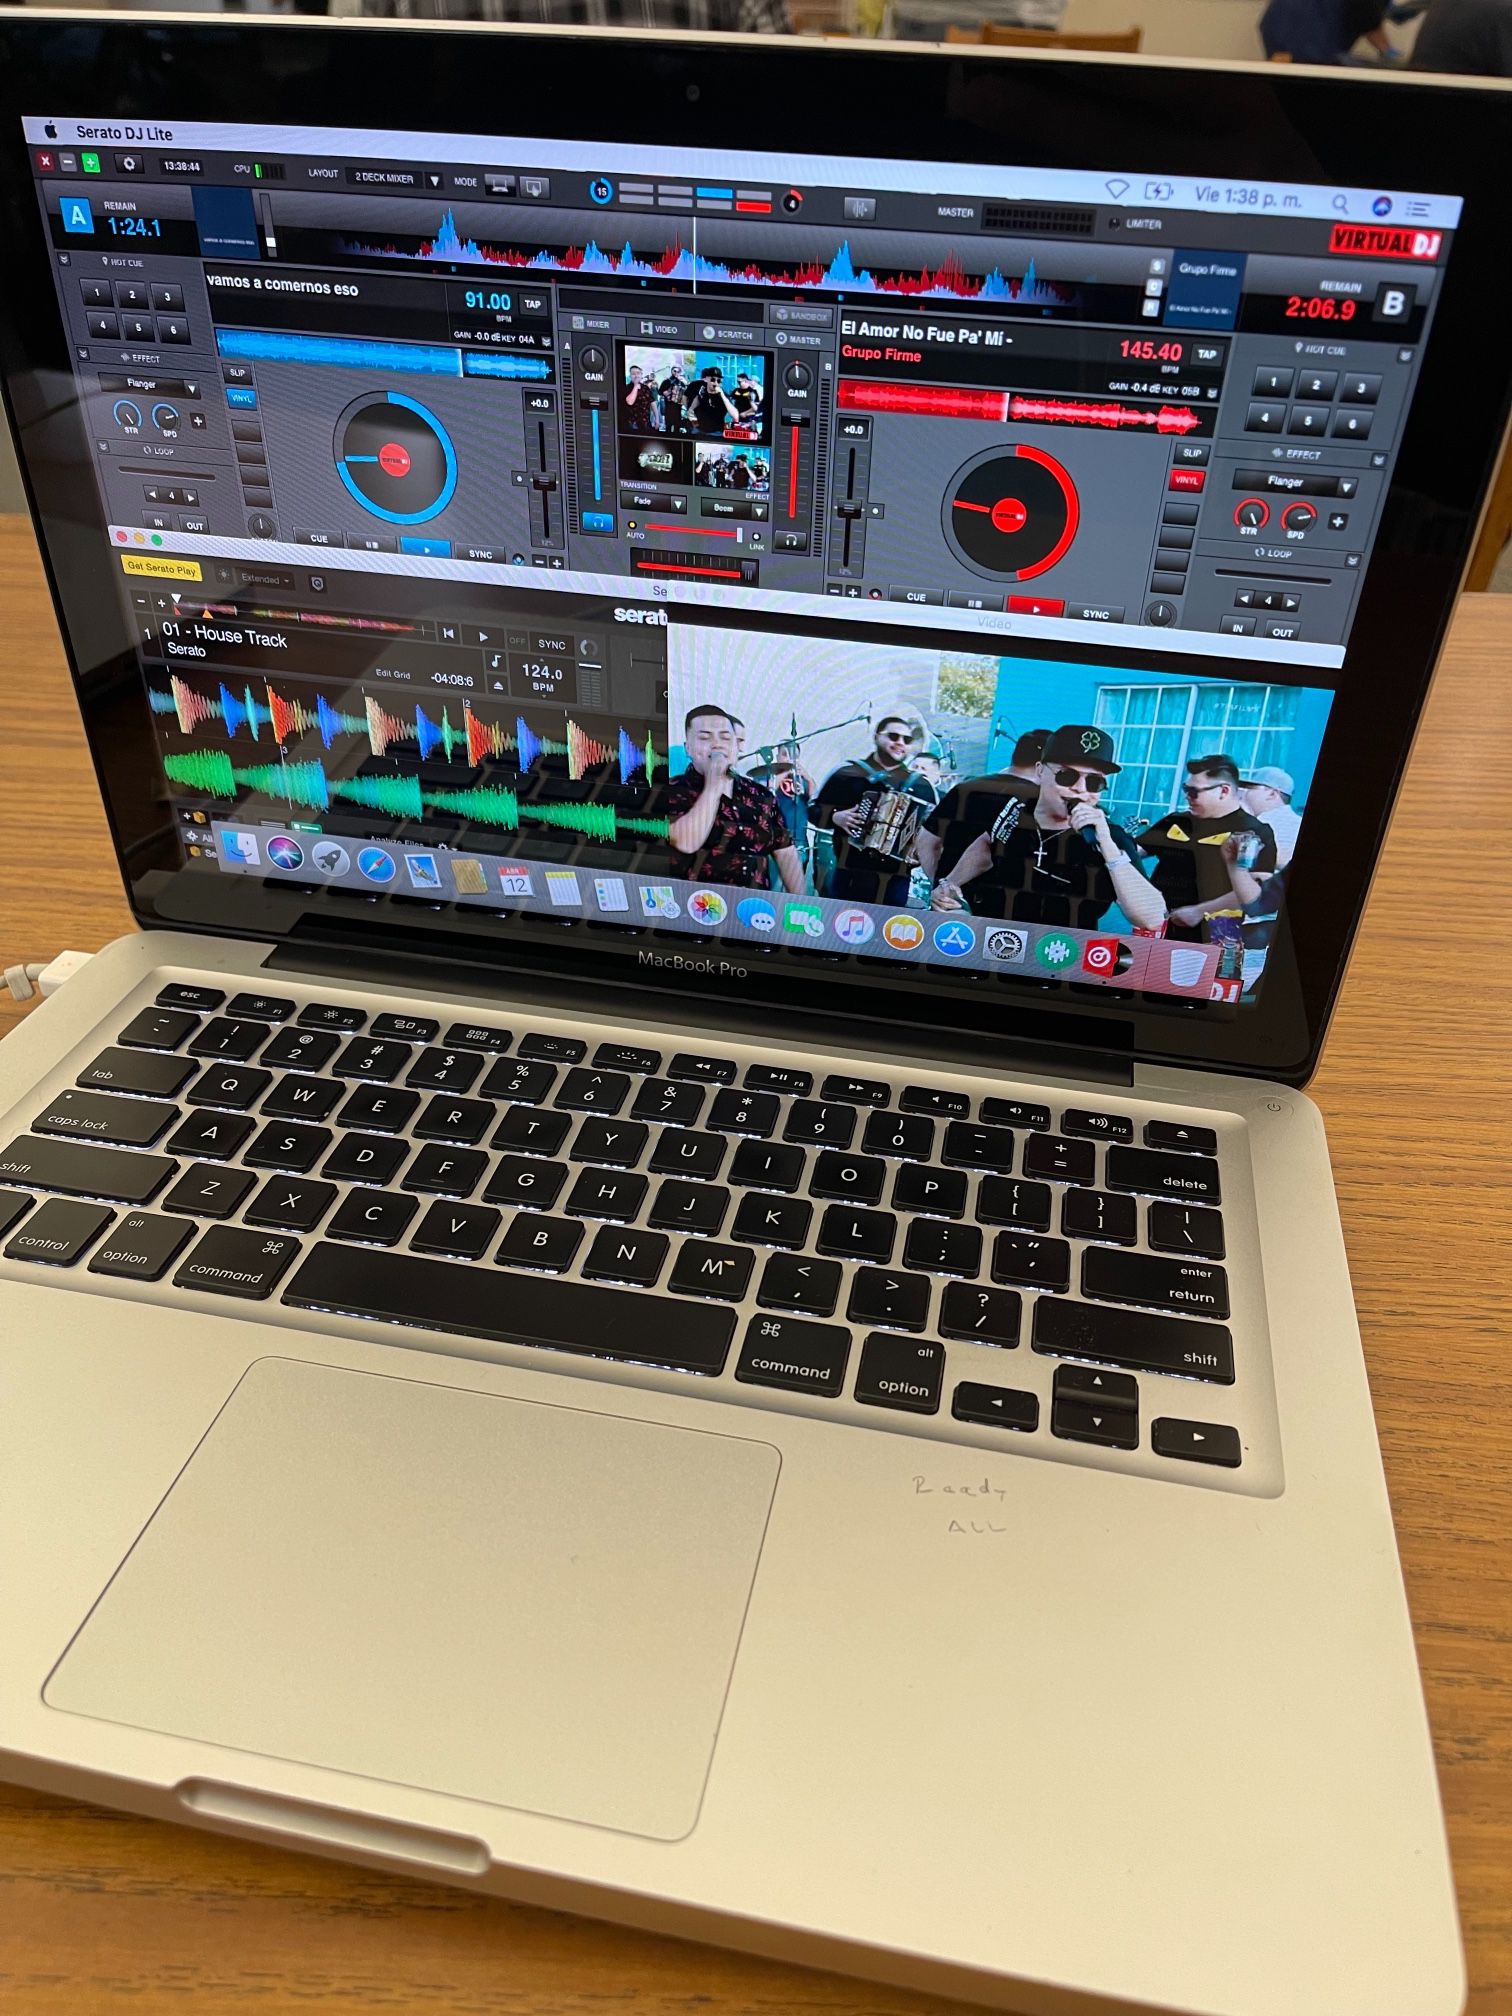 MacBook pro i5 500gb+ 8gb ram Installed programs included 👇 ✅VIRTUAL DJ 8 pro ✅Serato dj lite ✅More than 15,000 songs all kind mostly Spanish  ✅Every